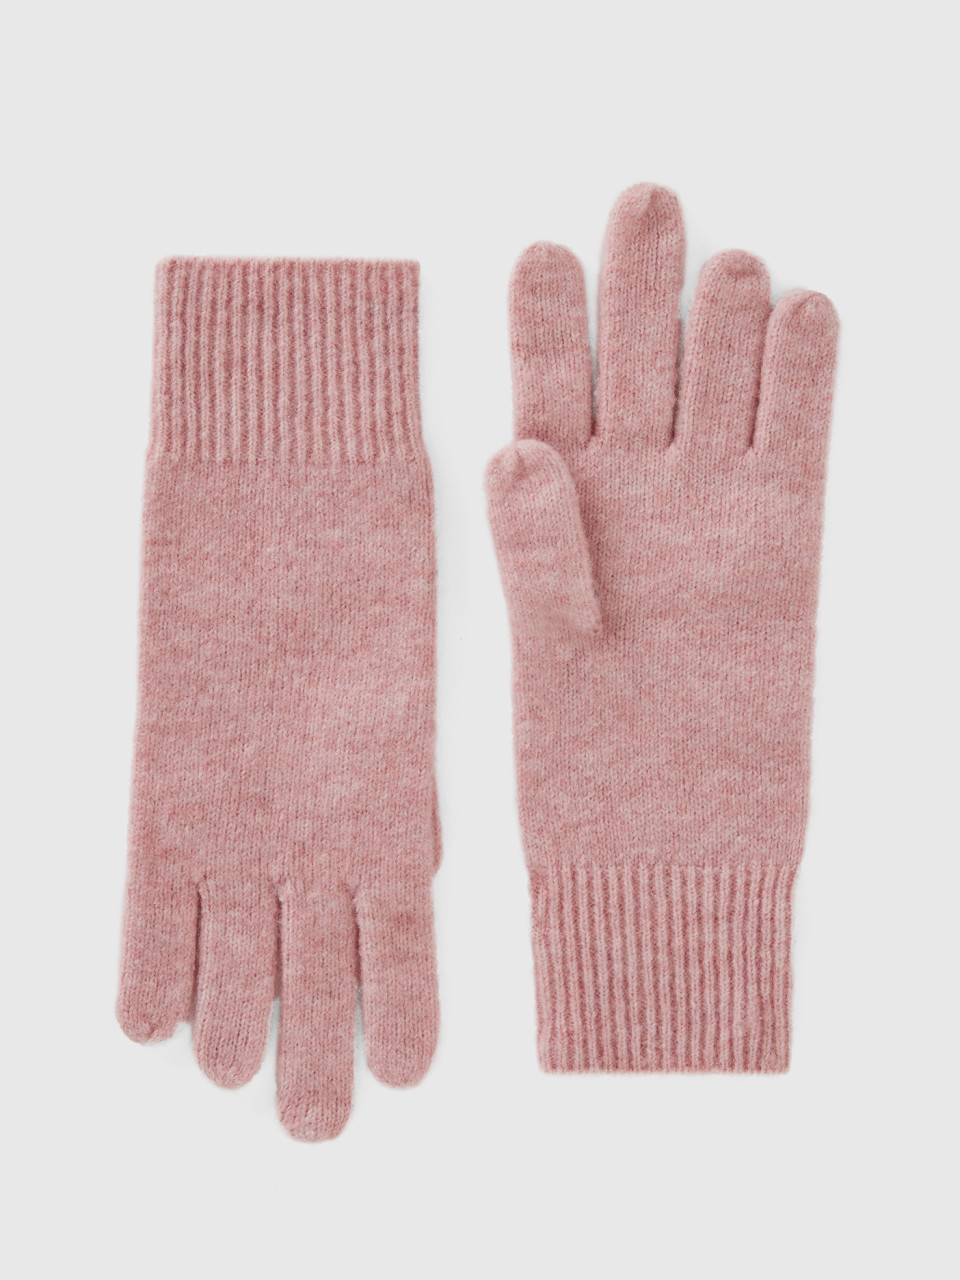 Benetton, Gloves In Recycled Yarn, Pink, Women